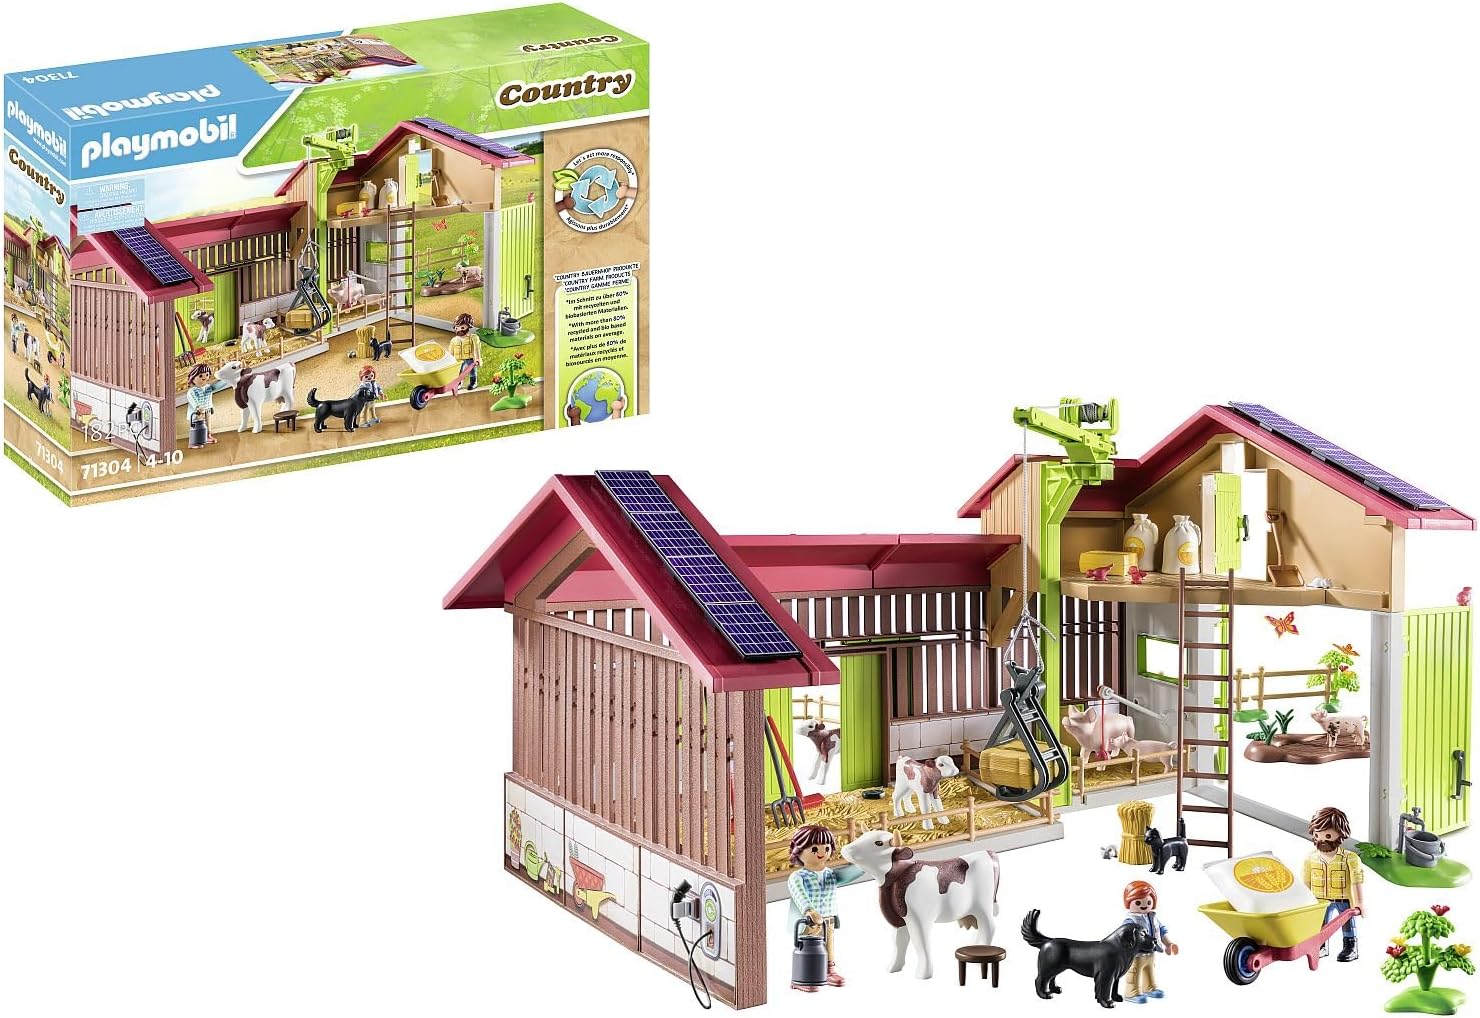 PLAYMOBIL Country 71304 Large Farm for Ages 4+